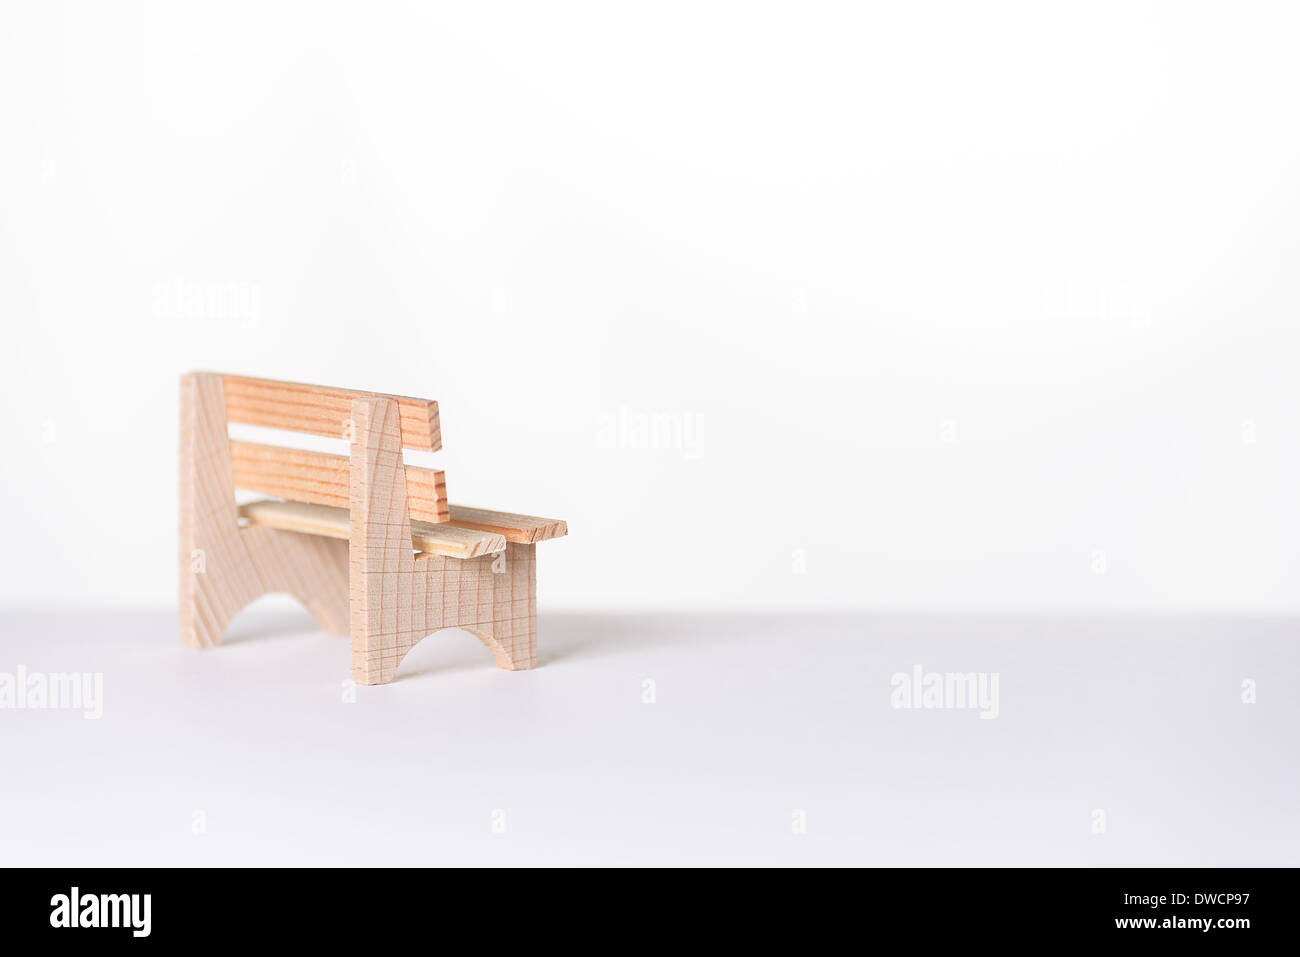 Small simple rustic vacant wooden bench placed to the side in an airy bright white minimalist room with copyspace Stock Photo